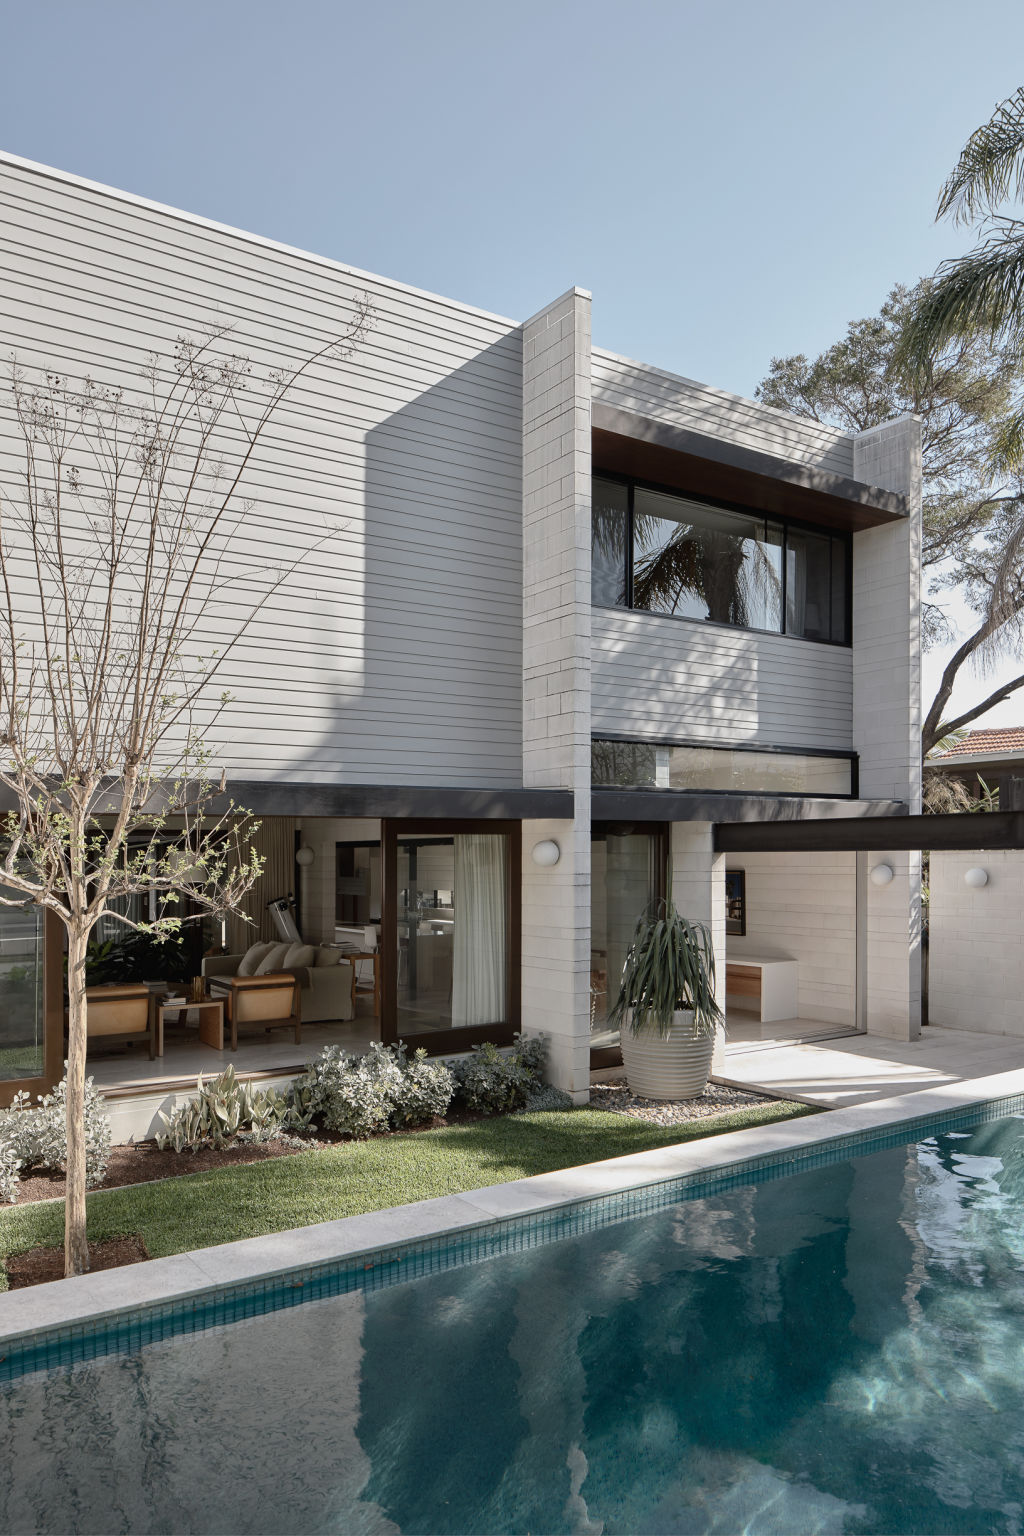 The home is wrapped around the courtyard and the pool, offering complete privacy. Photo: Supplied